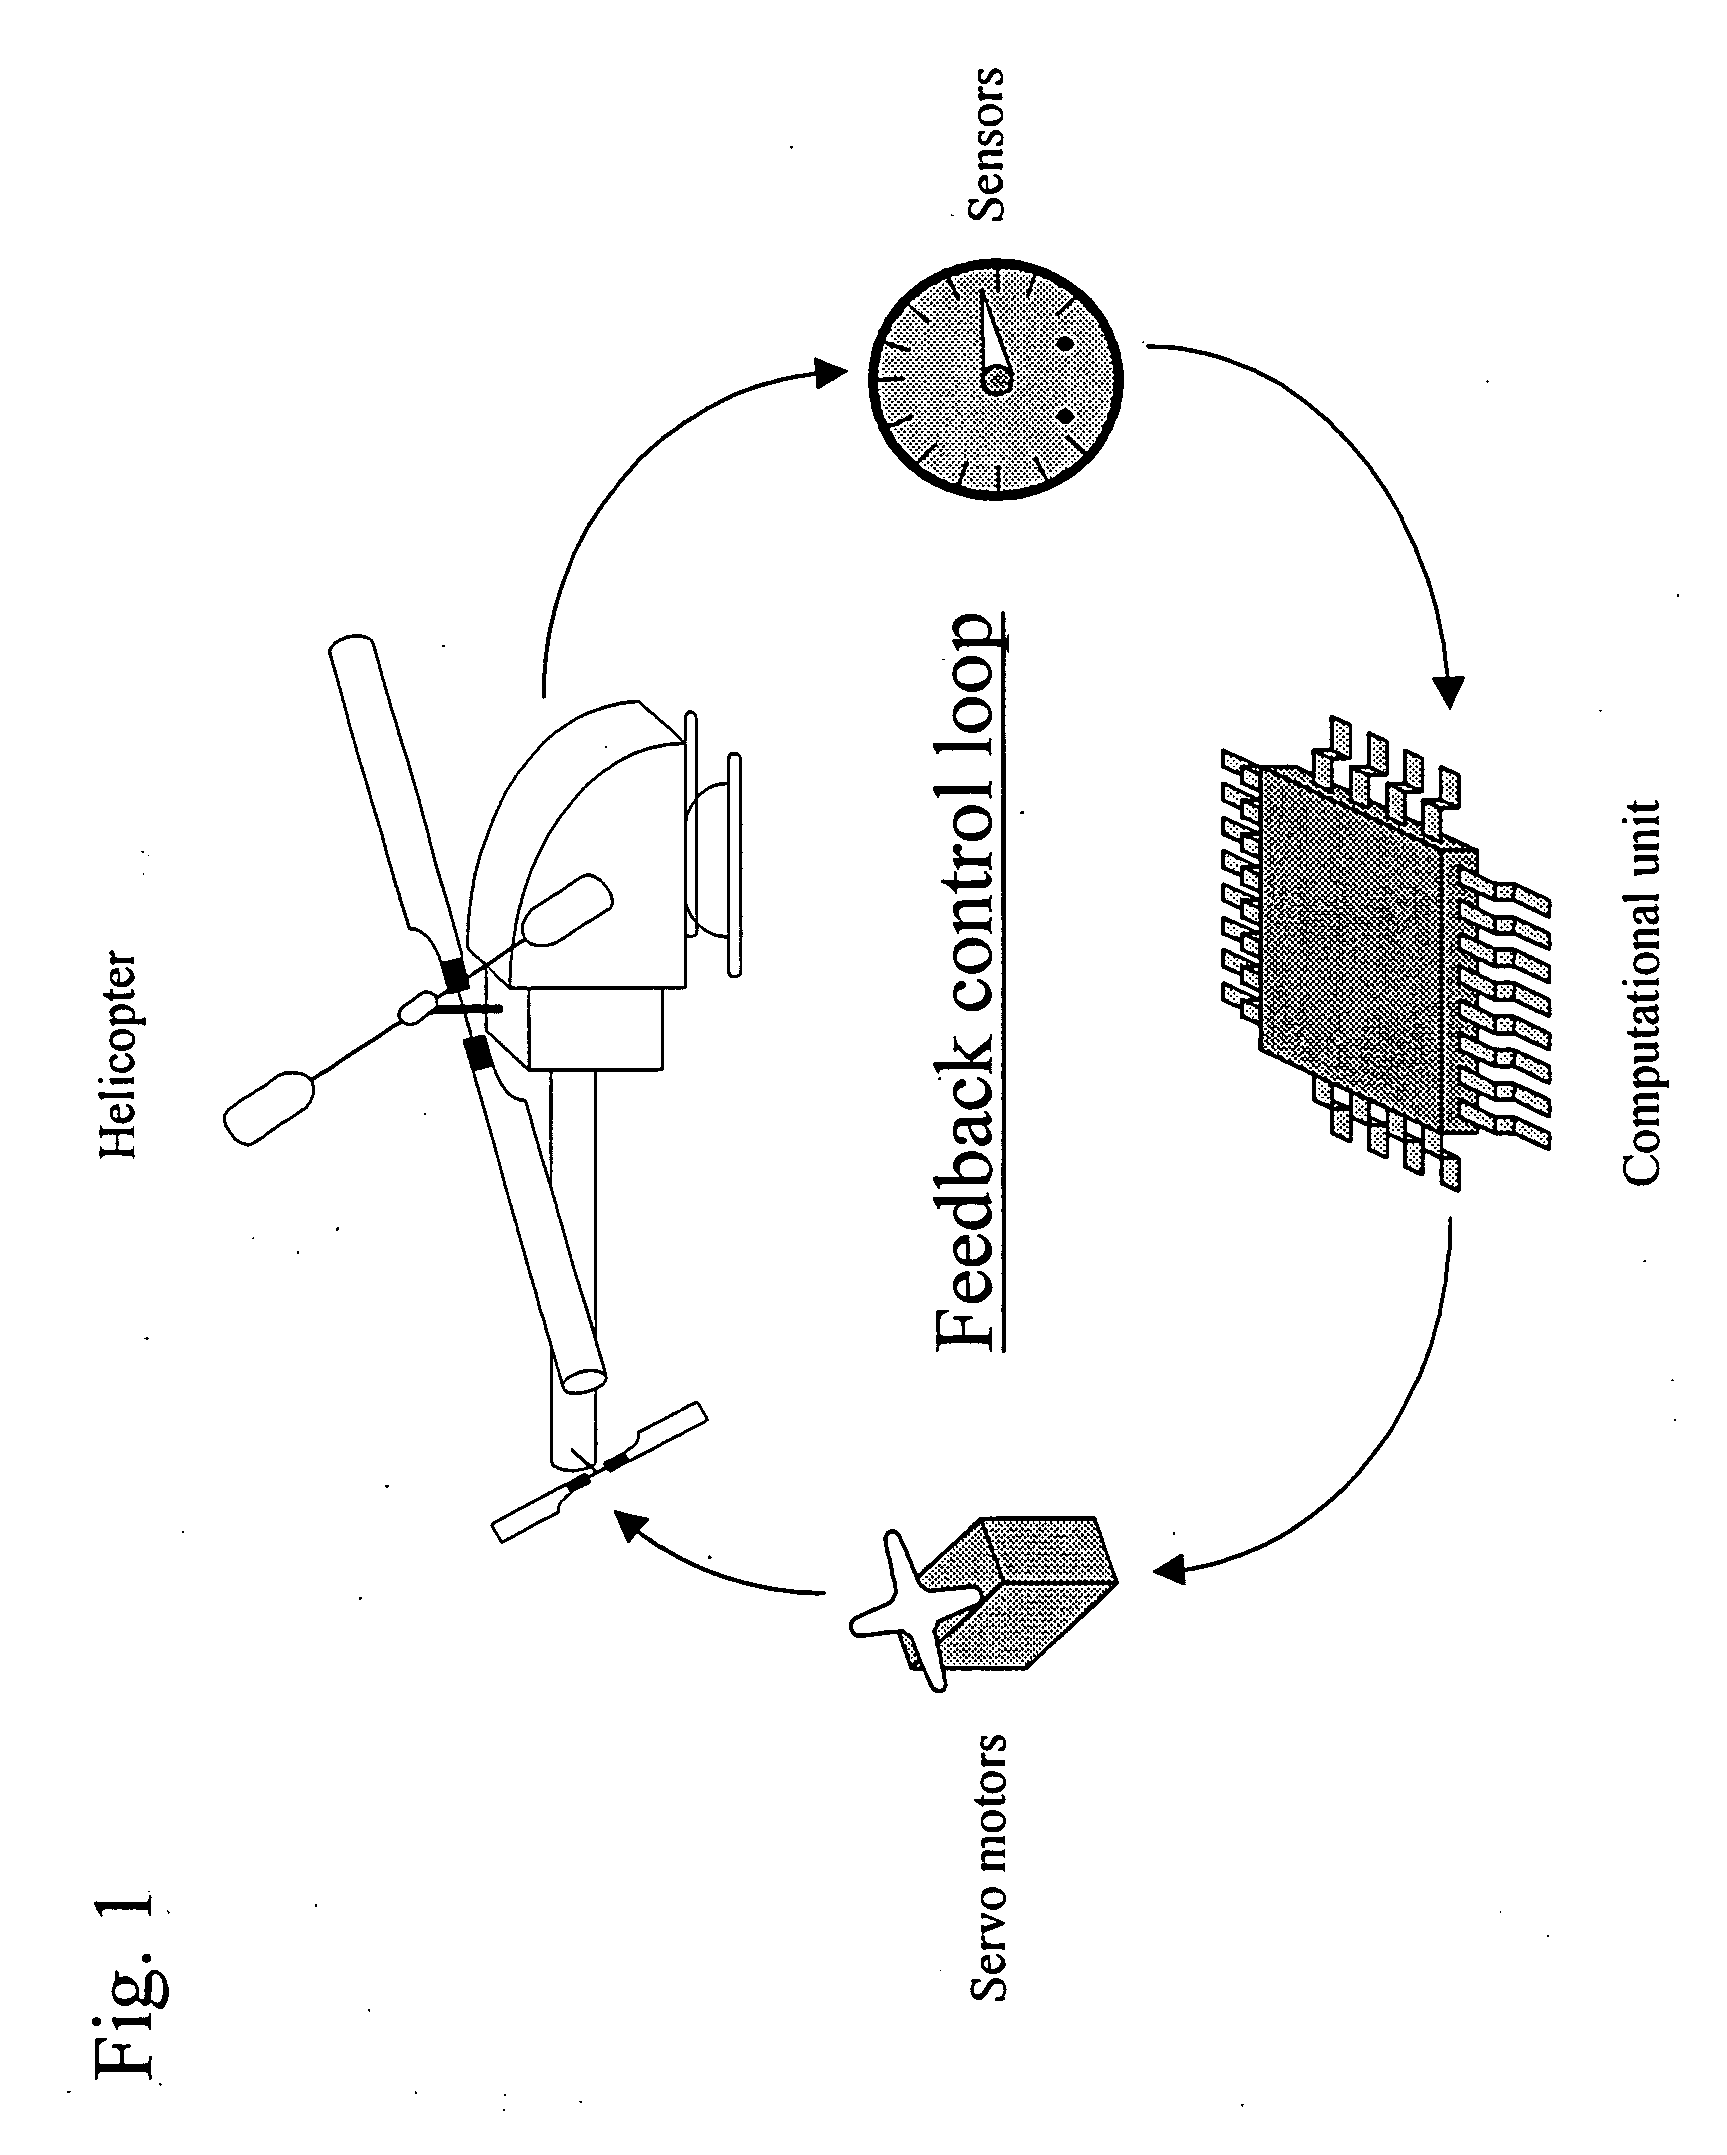 Autonomous control system apparatus and program for a small, unmanned helicopter